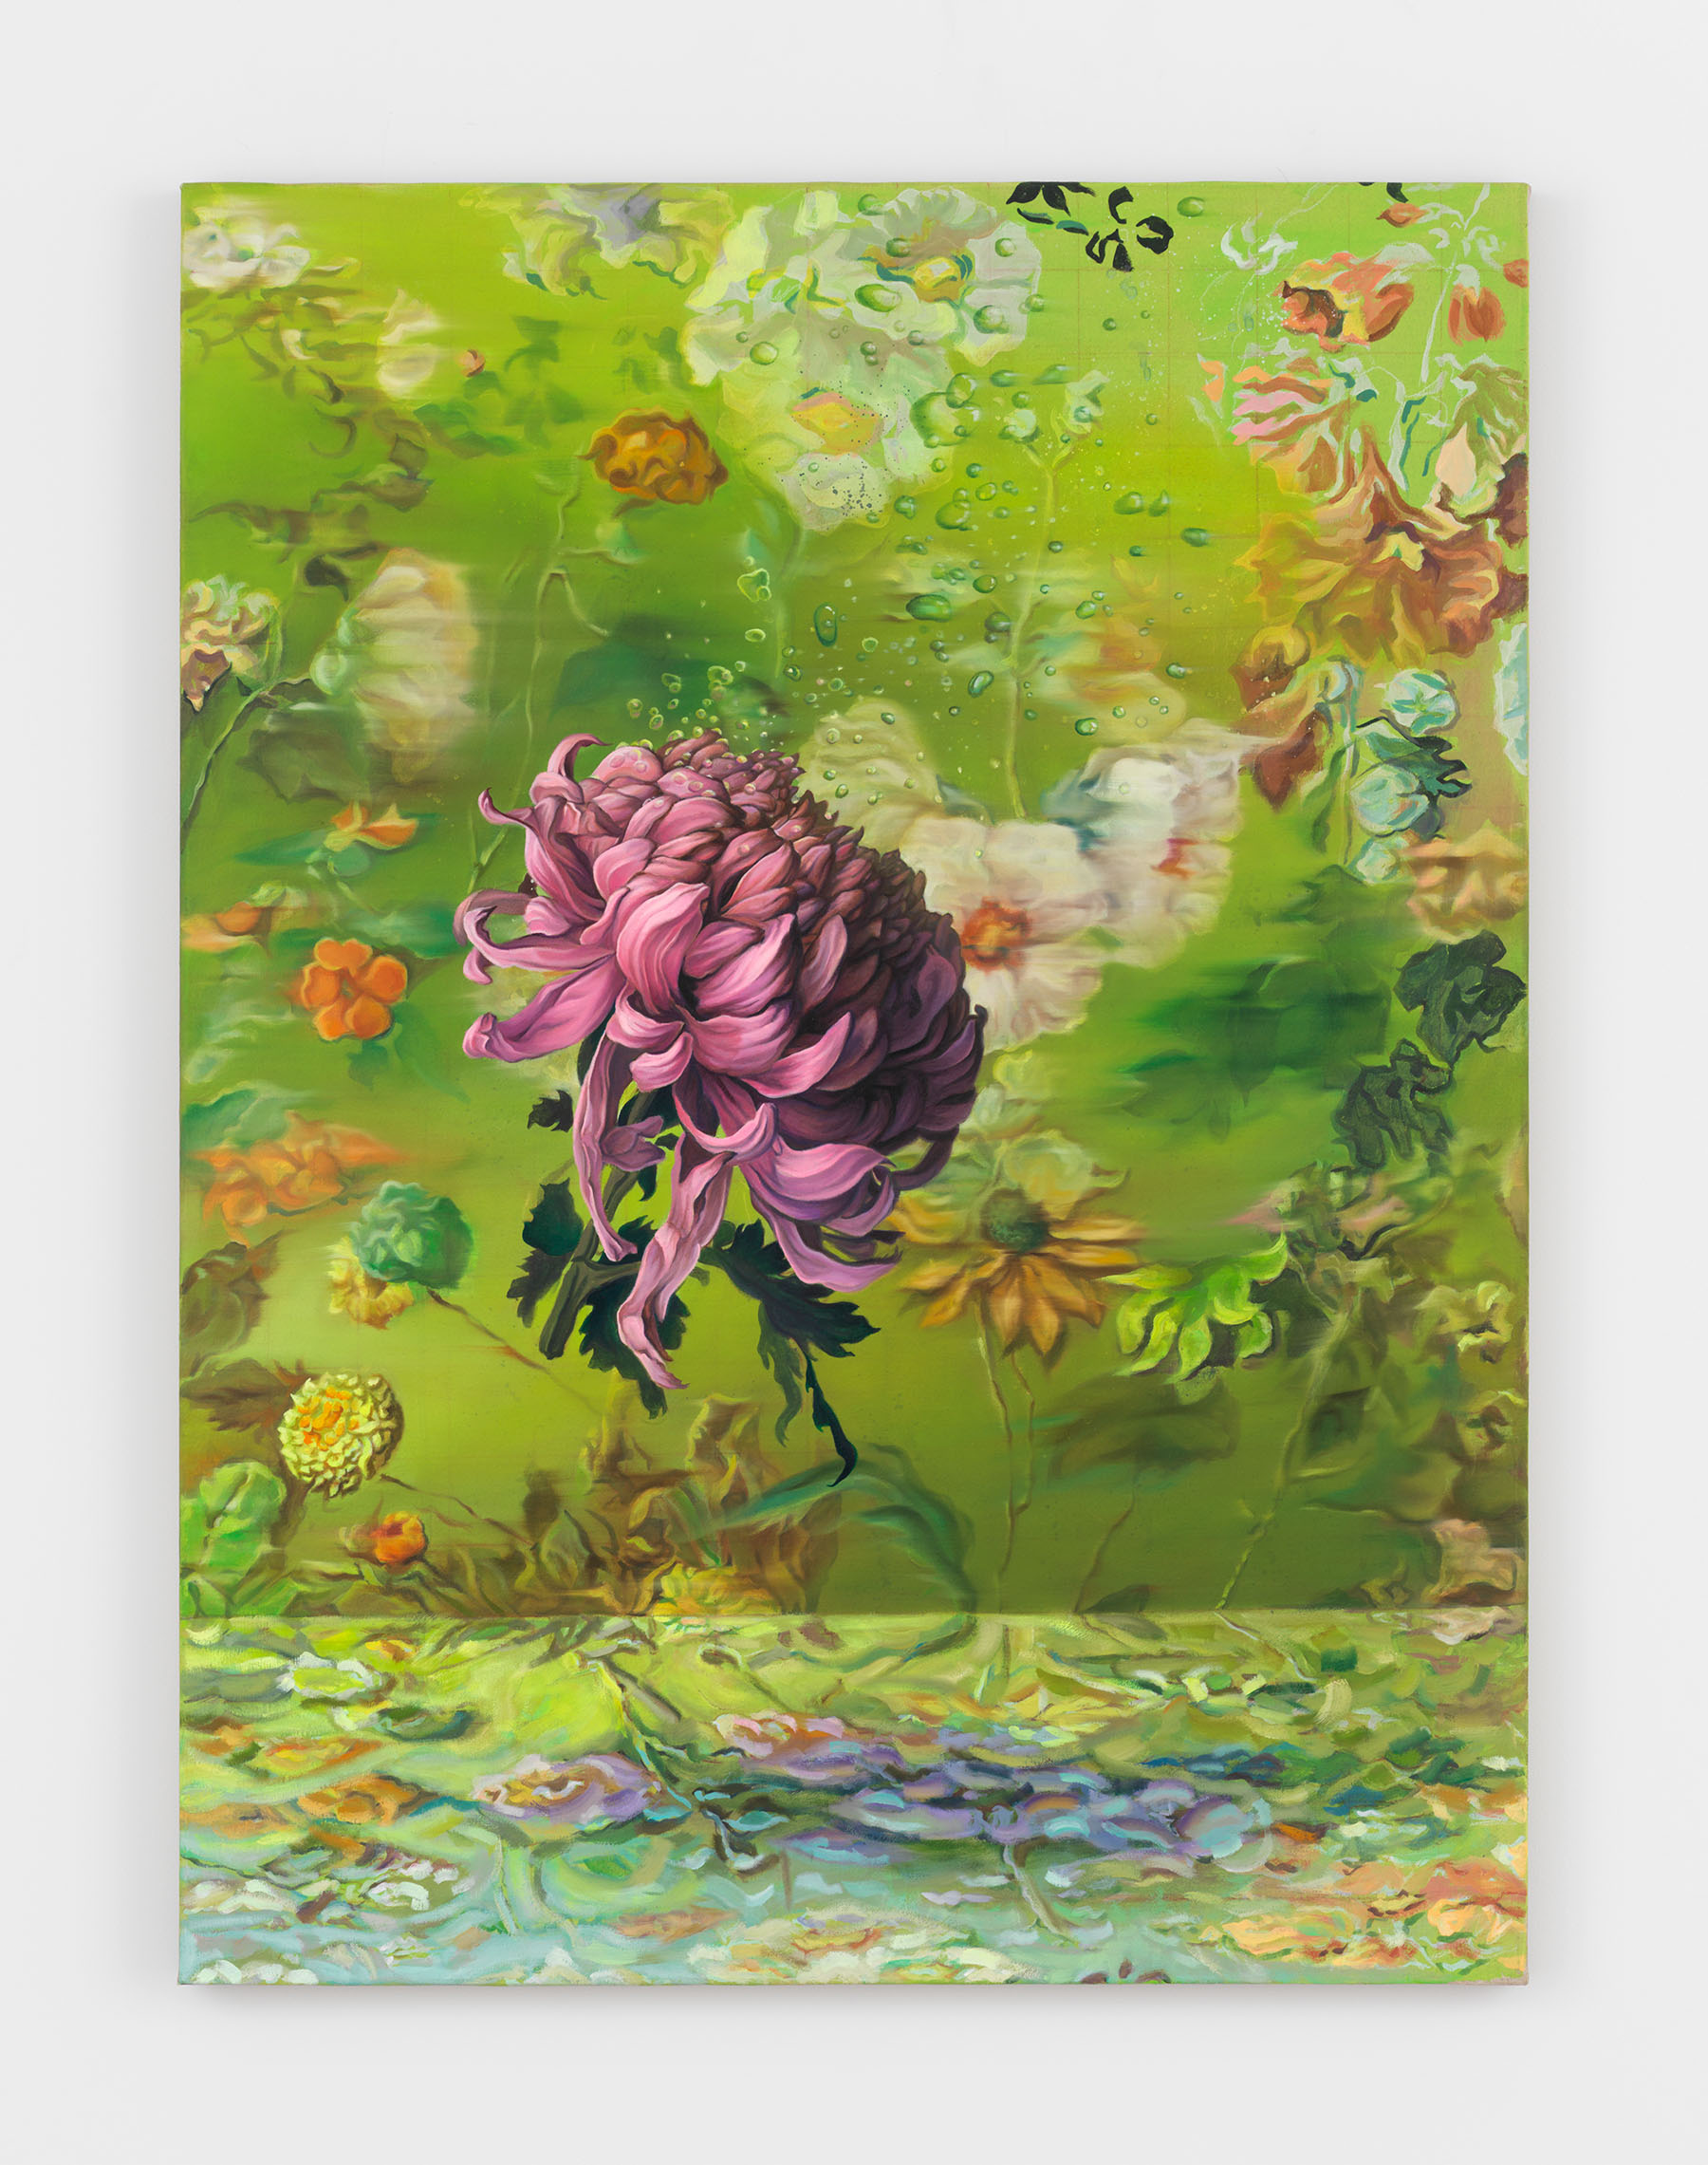 Chason Matthams, Corsage (lavender, pink, green), 2021, Oil on linen over panel, 16h x 20w in.